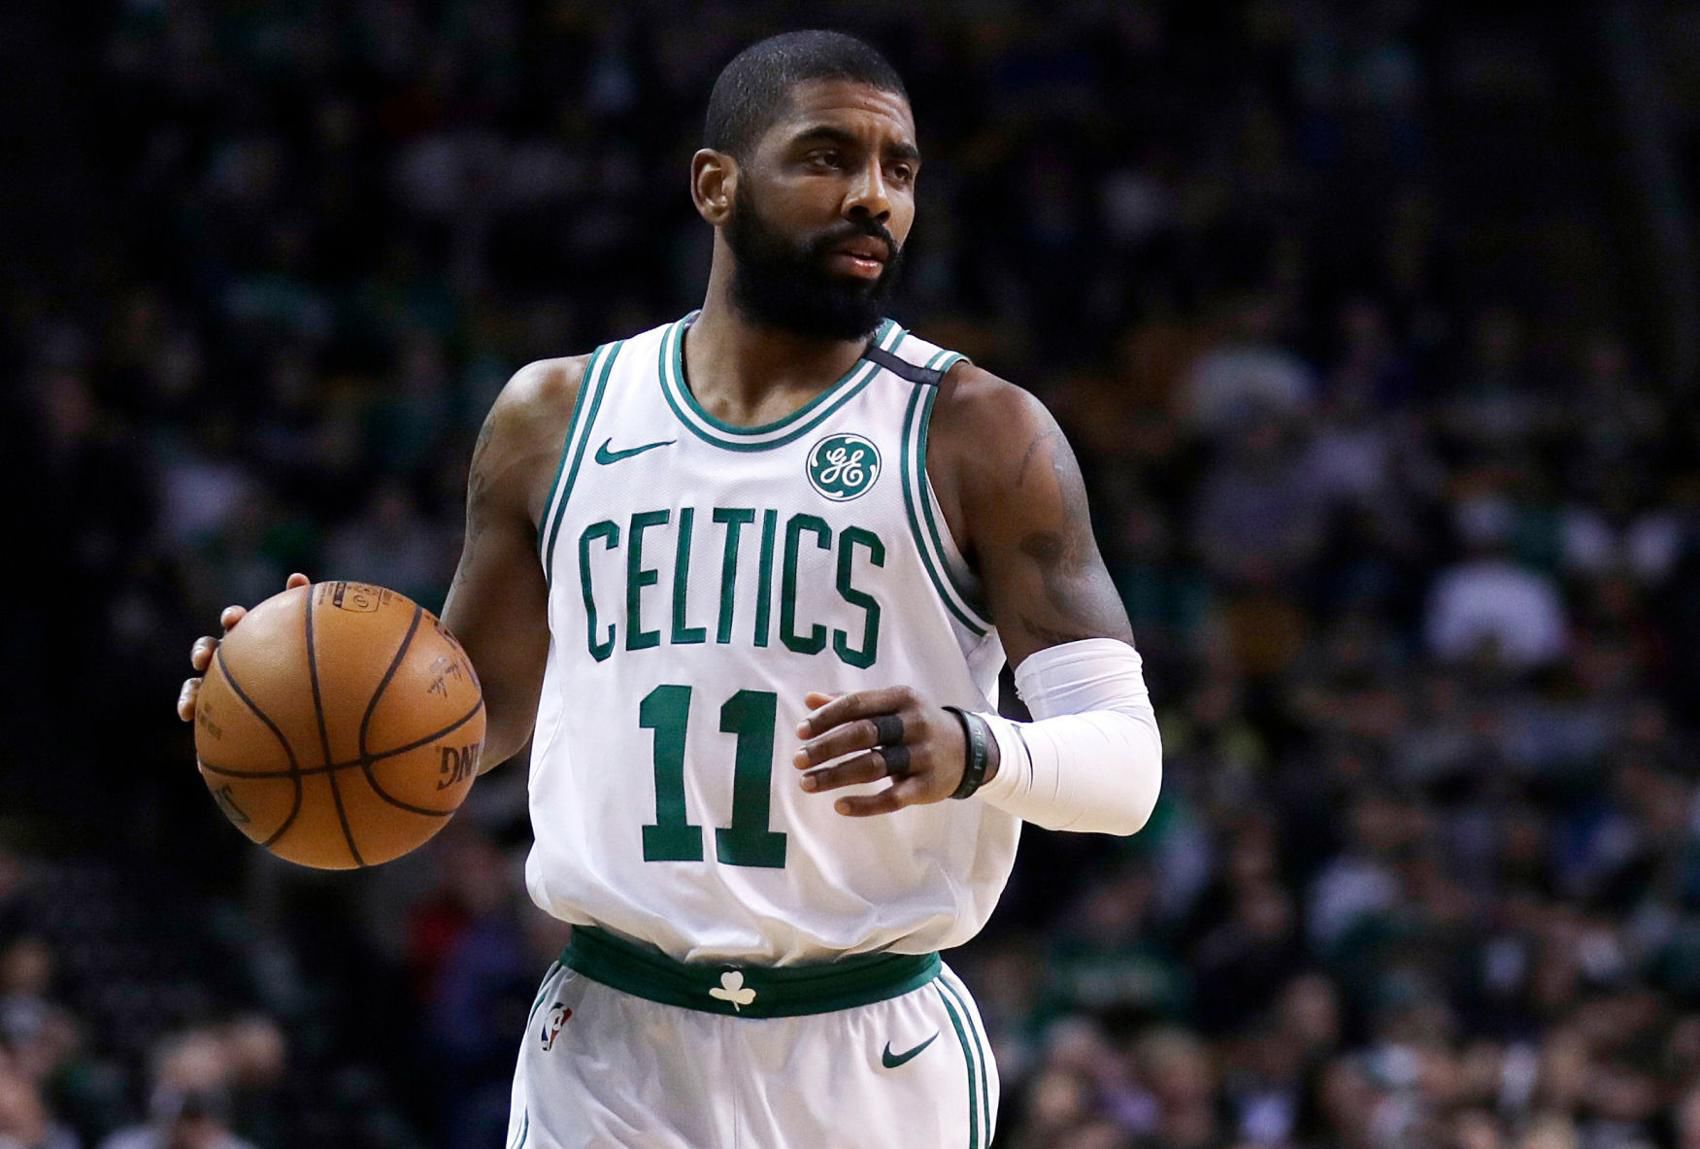 NBA star Kyrie Irving to visit Standing 